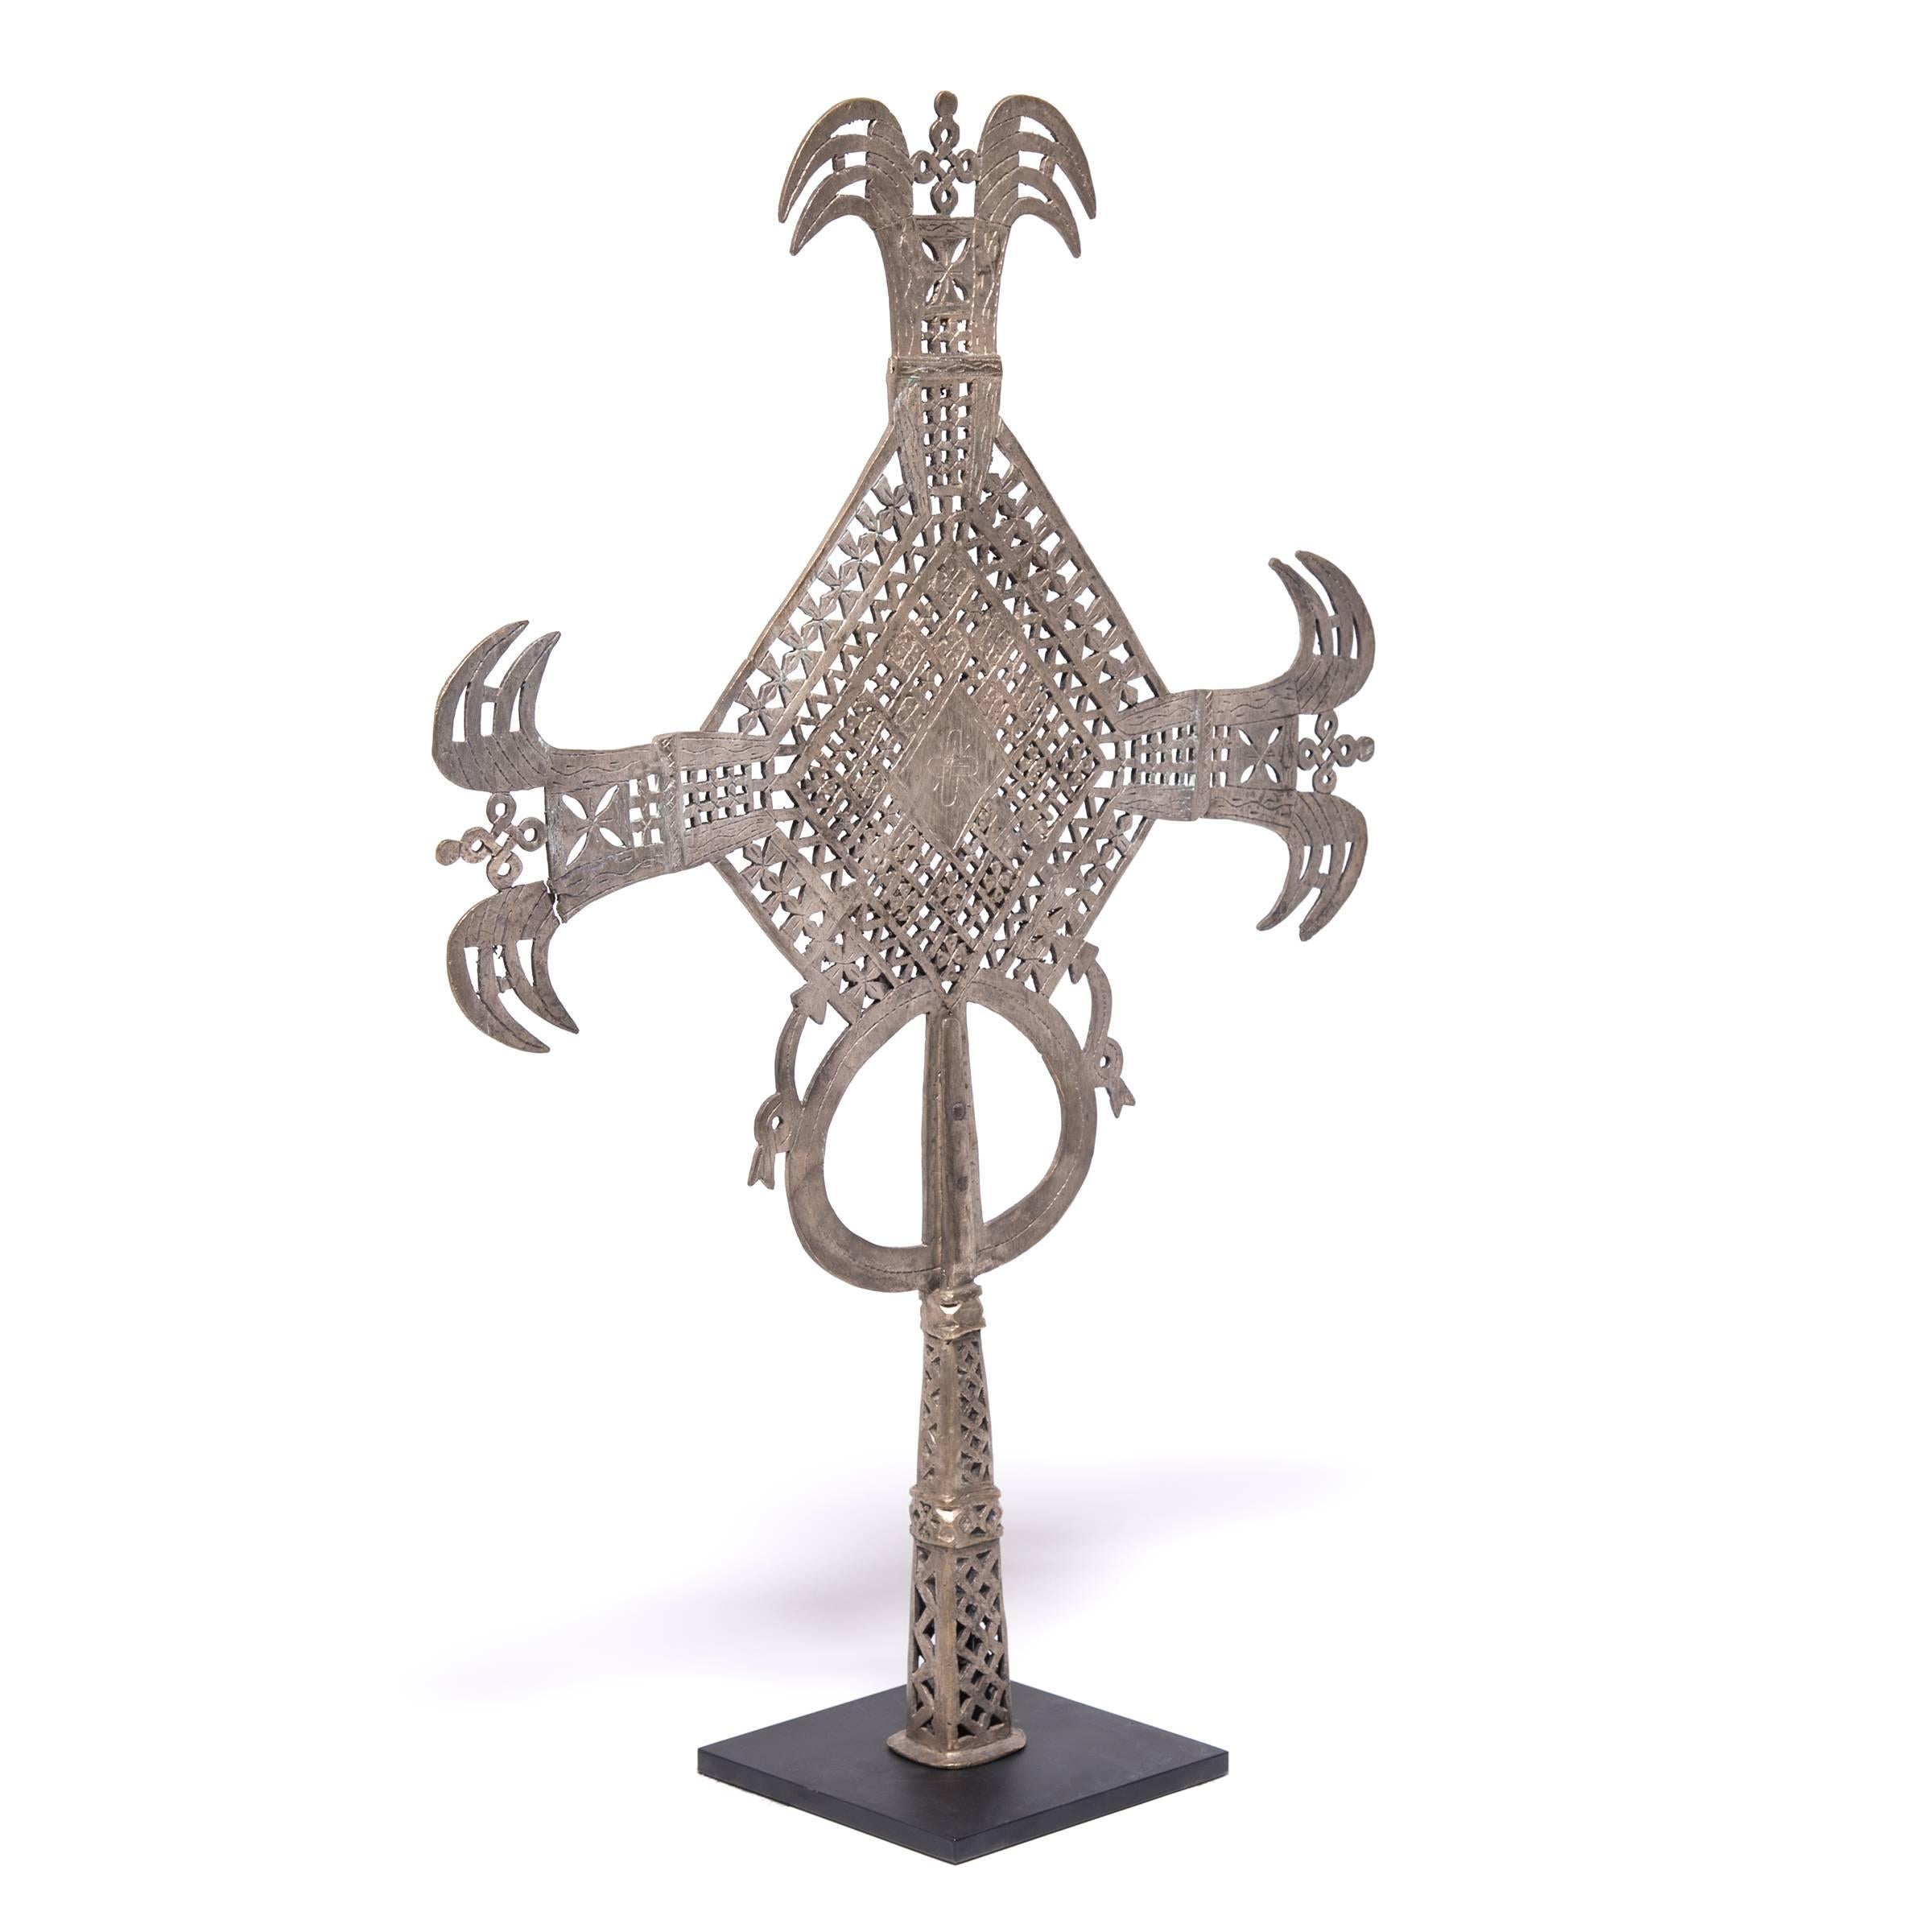 Ethiopia has been a Christian nation since the 4th century. The unique cross style of the region is specific to the Coptic subset of the Christian faith. The hollowed base could be either fitted over a staff for processionals or displayed at an